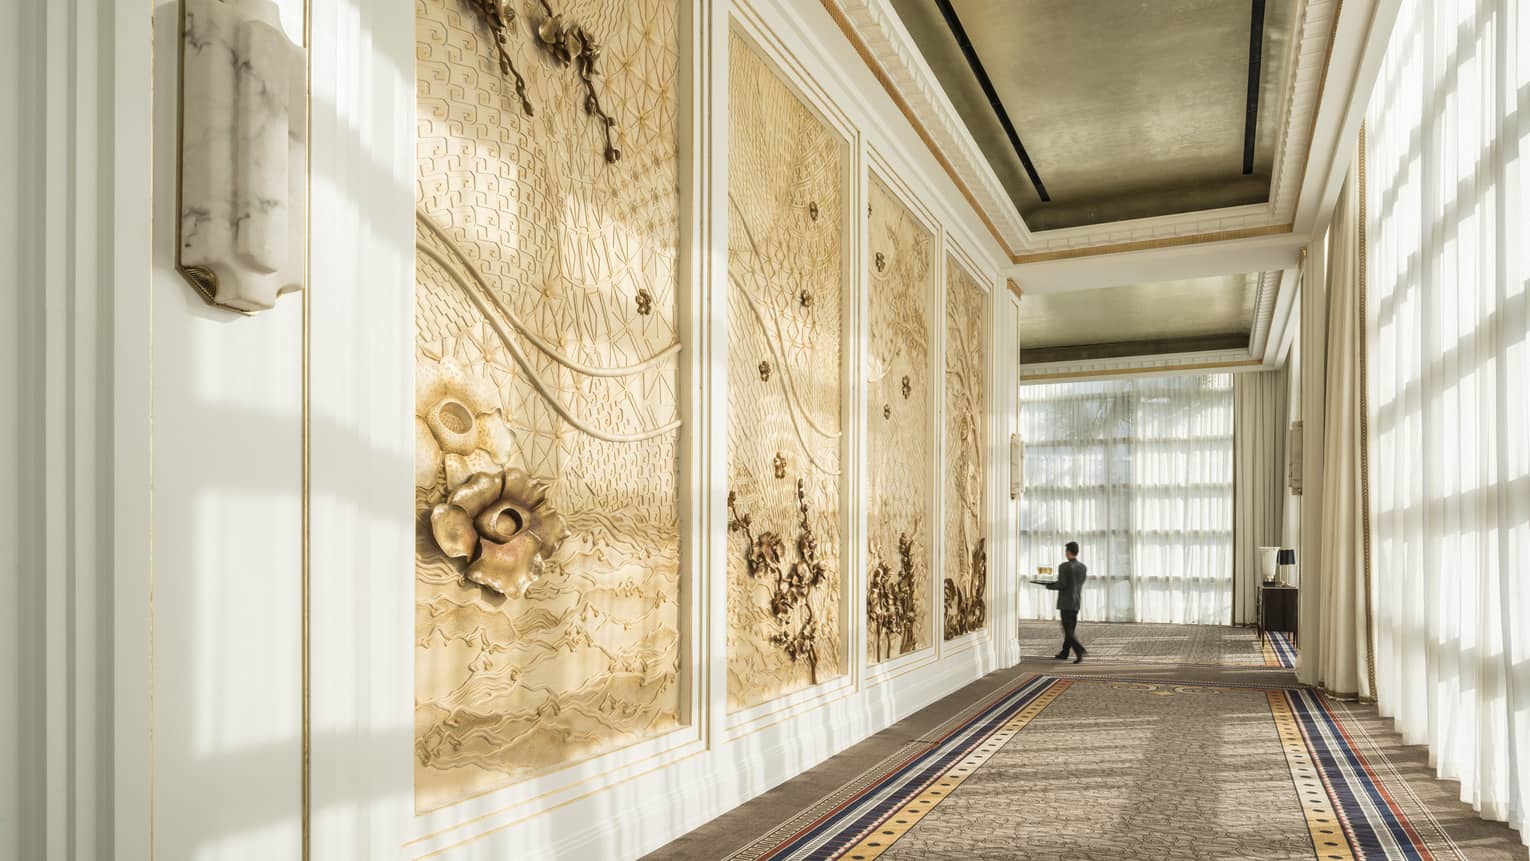 Hotel staff carries tray at end of long hallway past decorative paneled walls